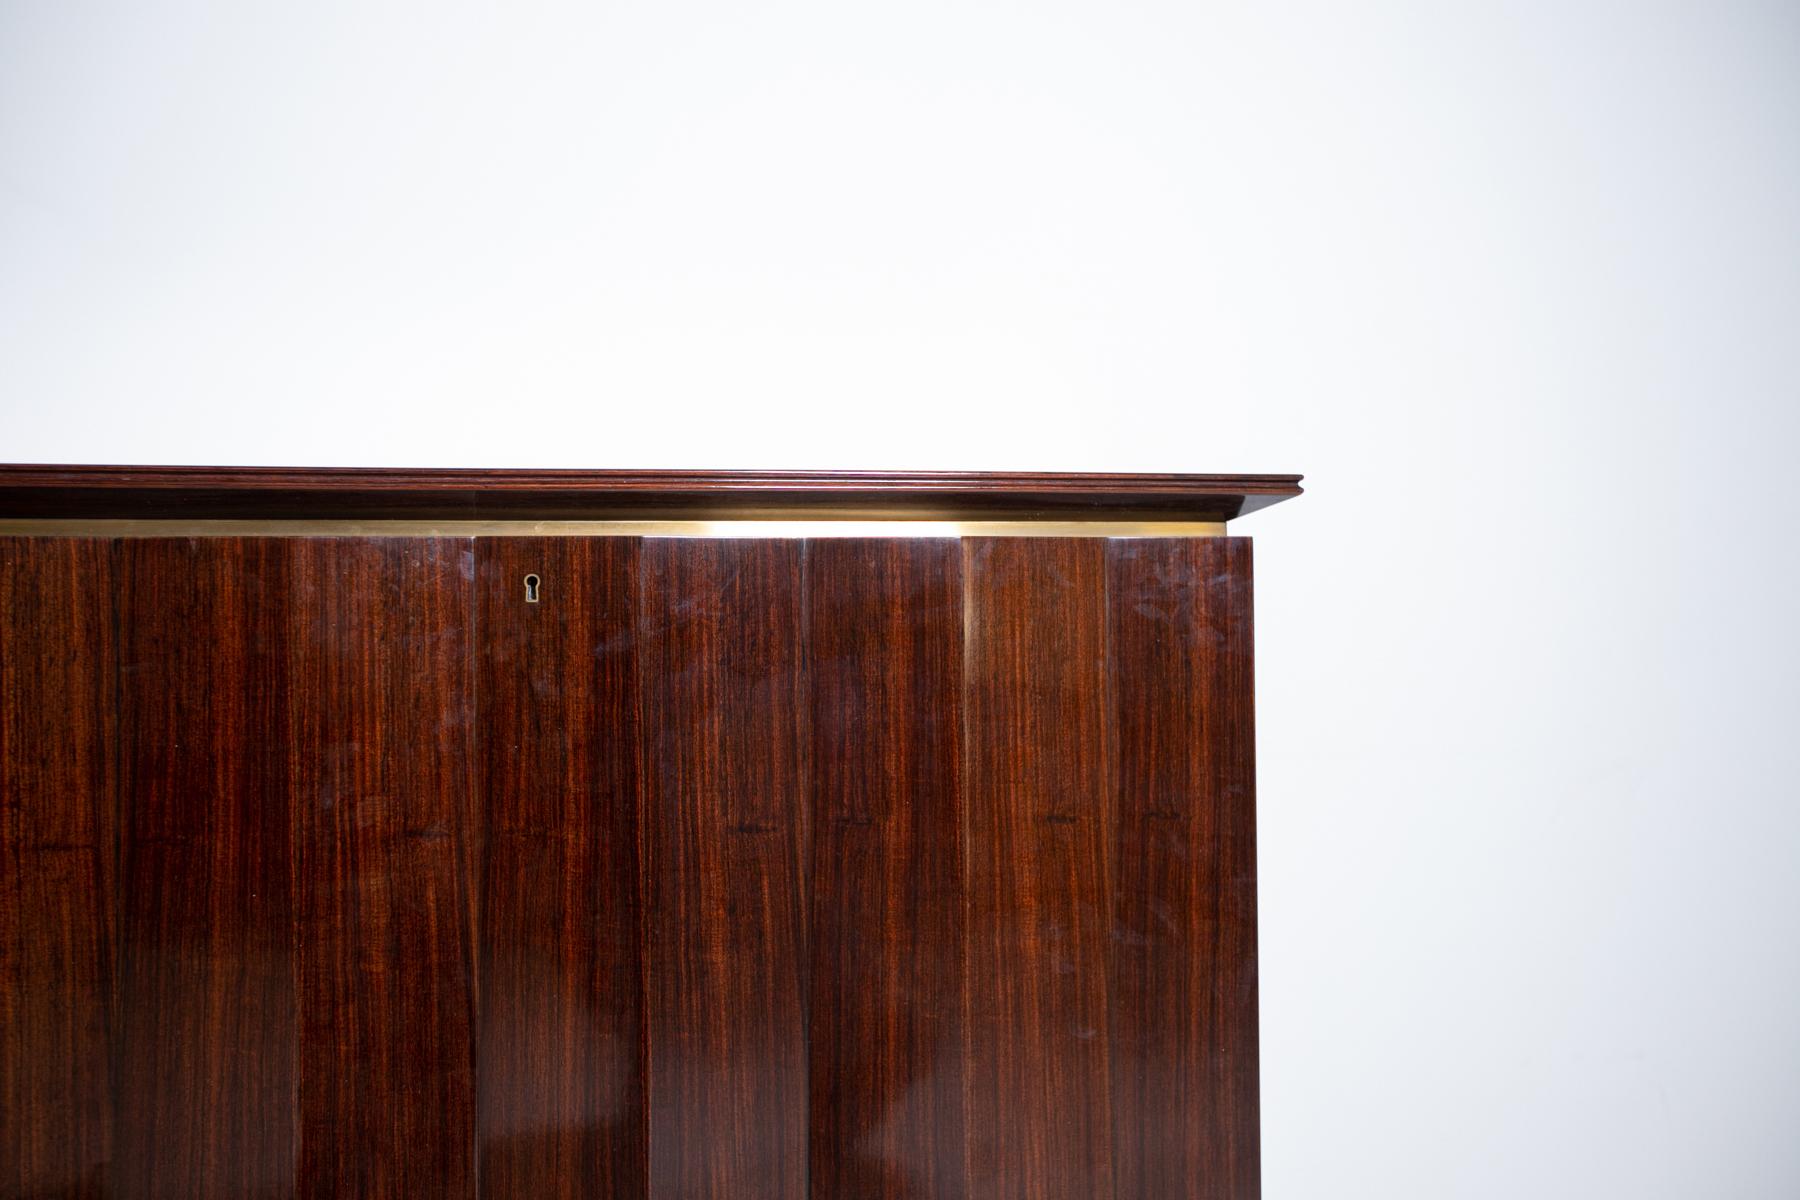 Important sideboard by Melchiorre Bega from the 1950s. The sideboard is made of precious woods. The peculiarity of the furniture is its processing of the doors, each door is made with a pyramid-shaped processing with wavy pattern. Under the shelf